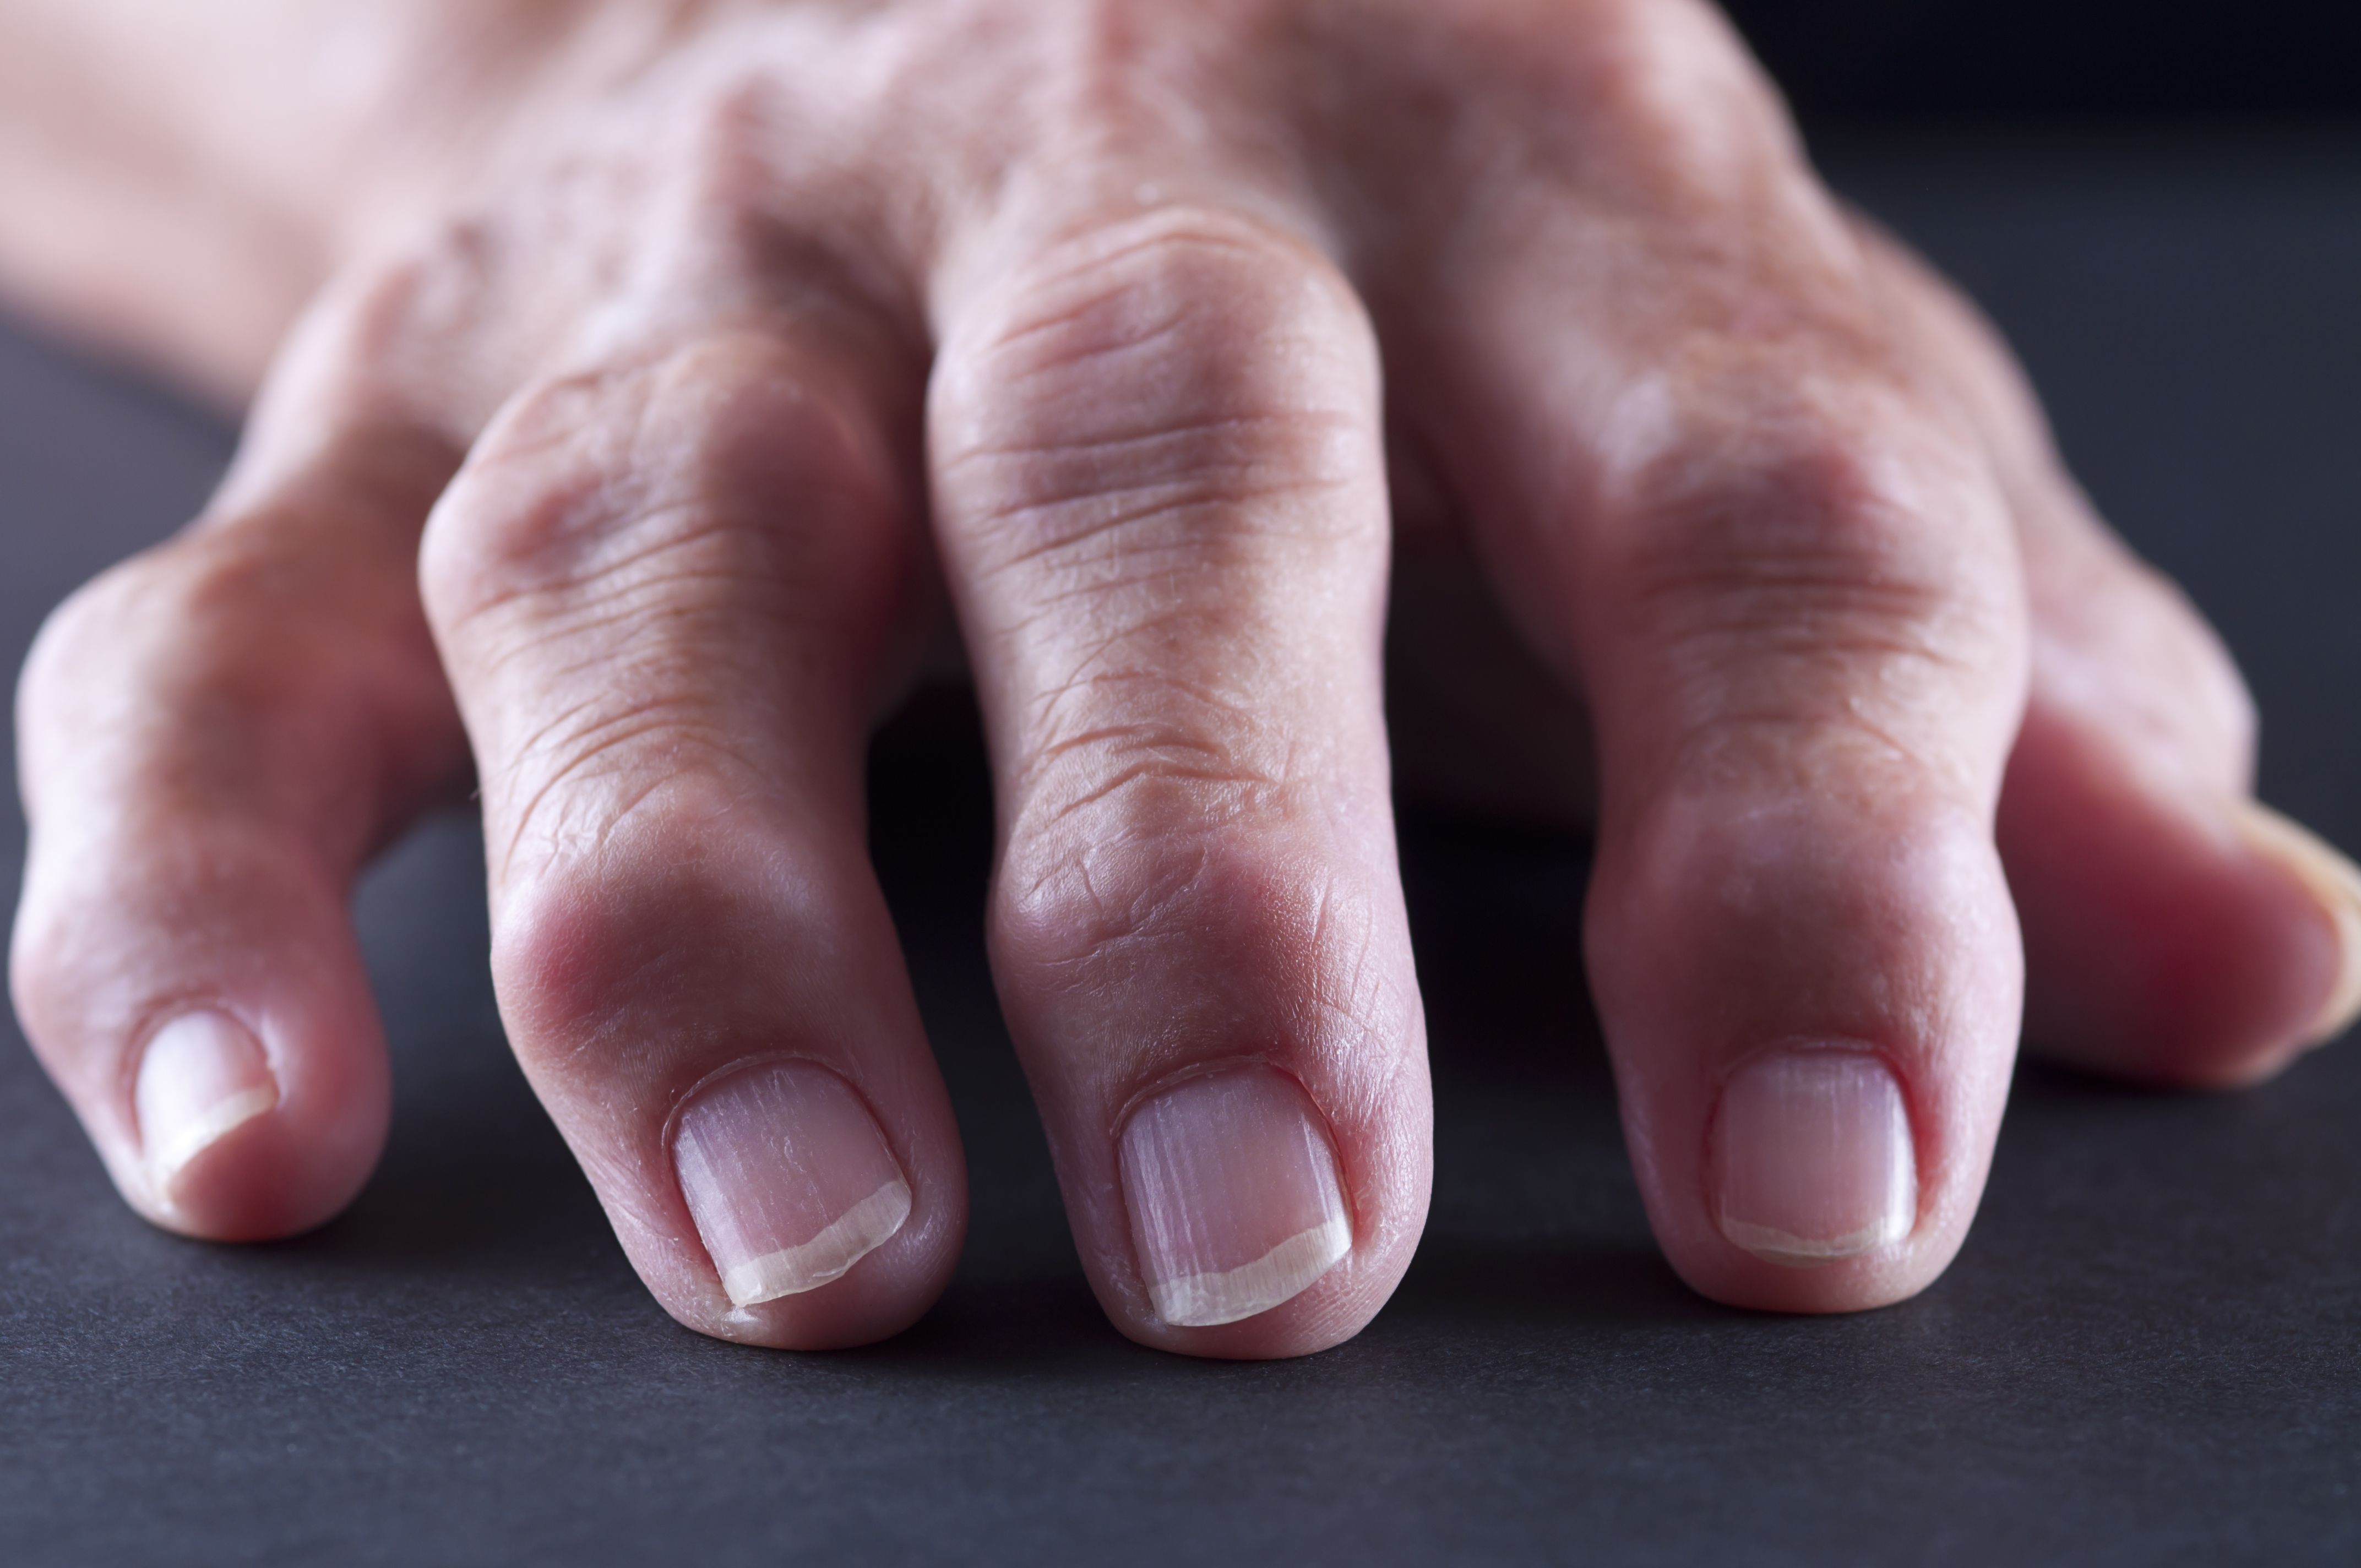 Stages of Psoriatic Arthritis: Signs of Early to Late Disease Progression